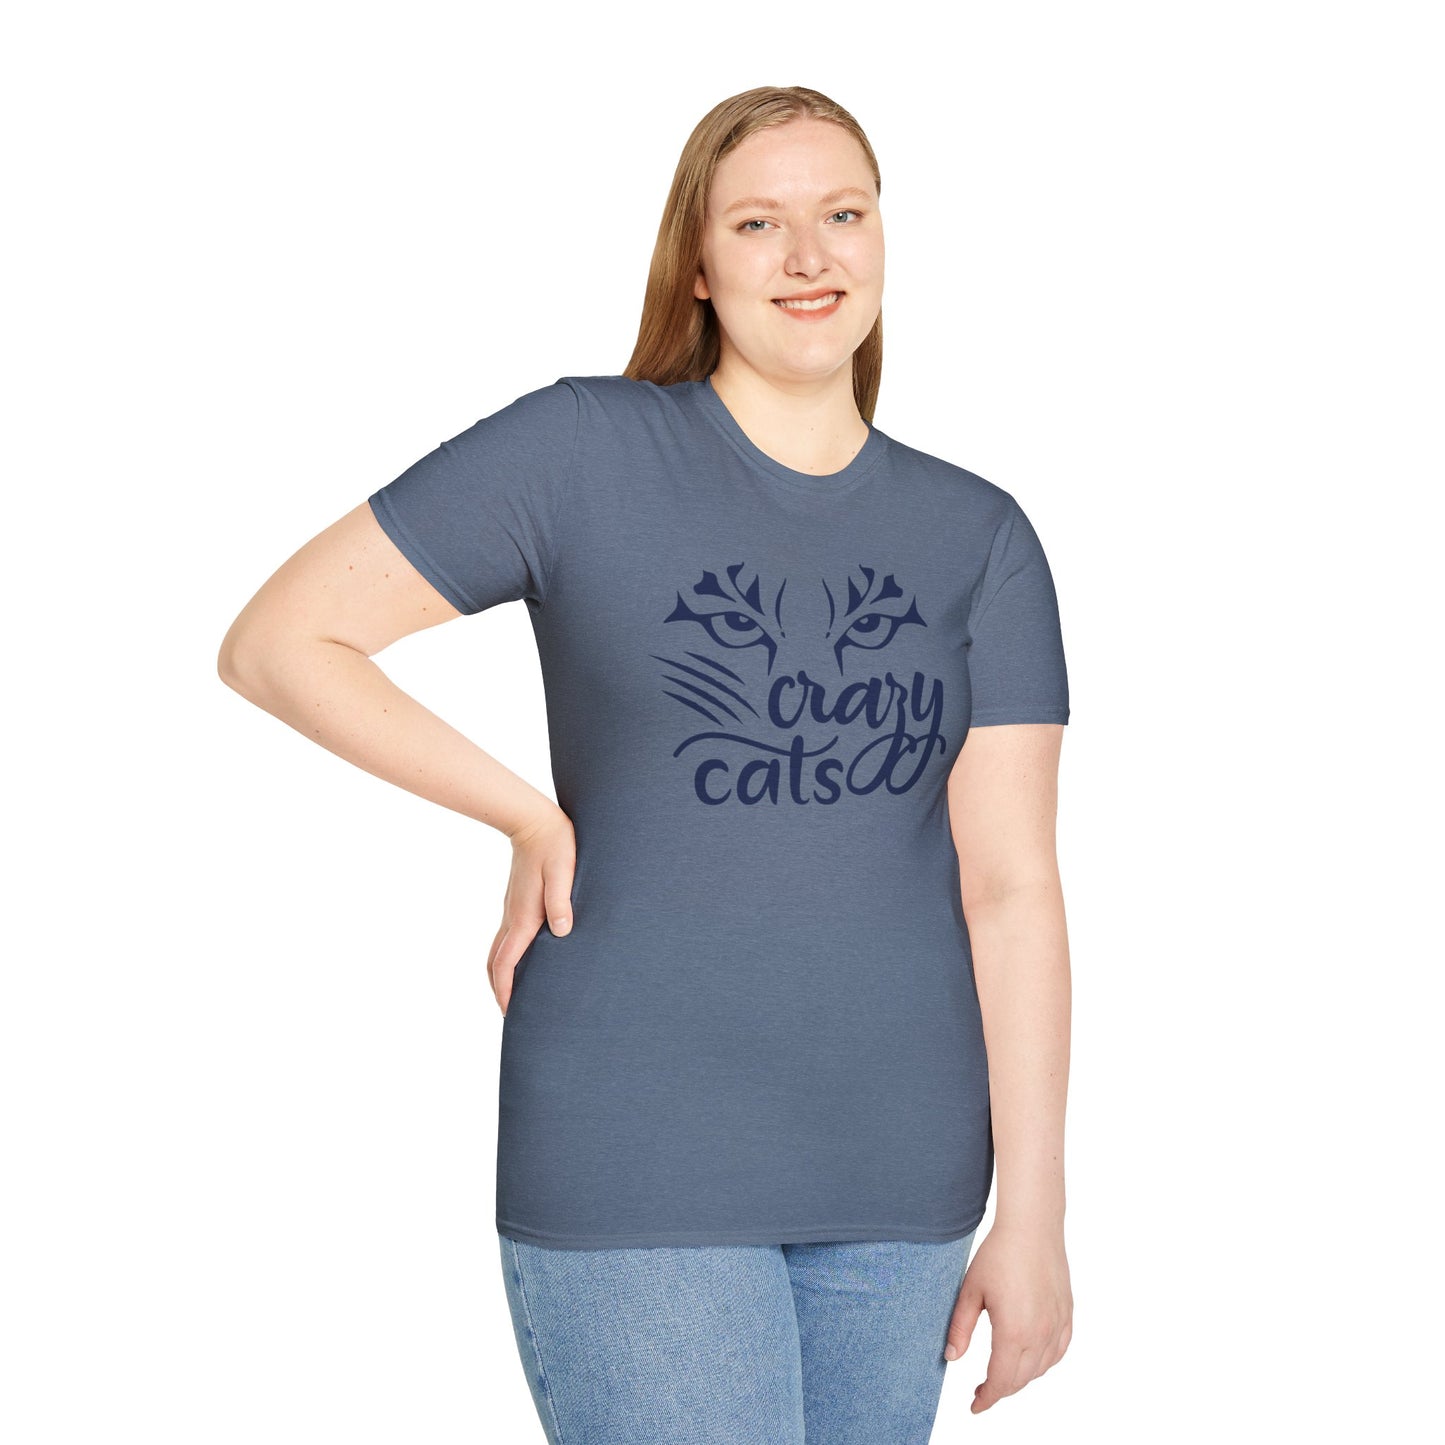 Crazy Cats Collection- Limited Edition Designs!